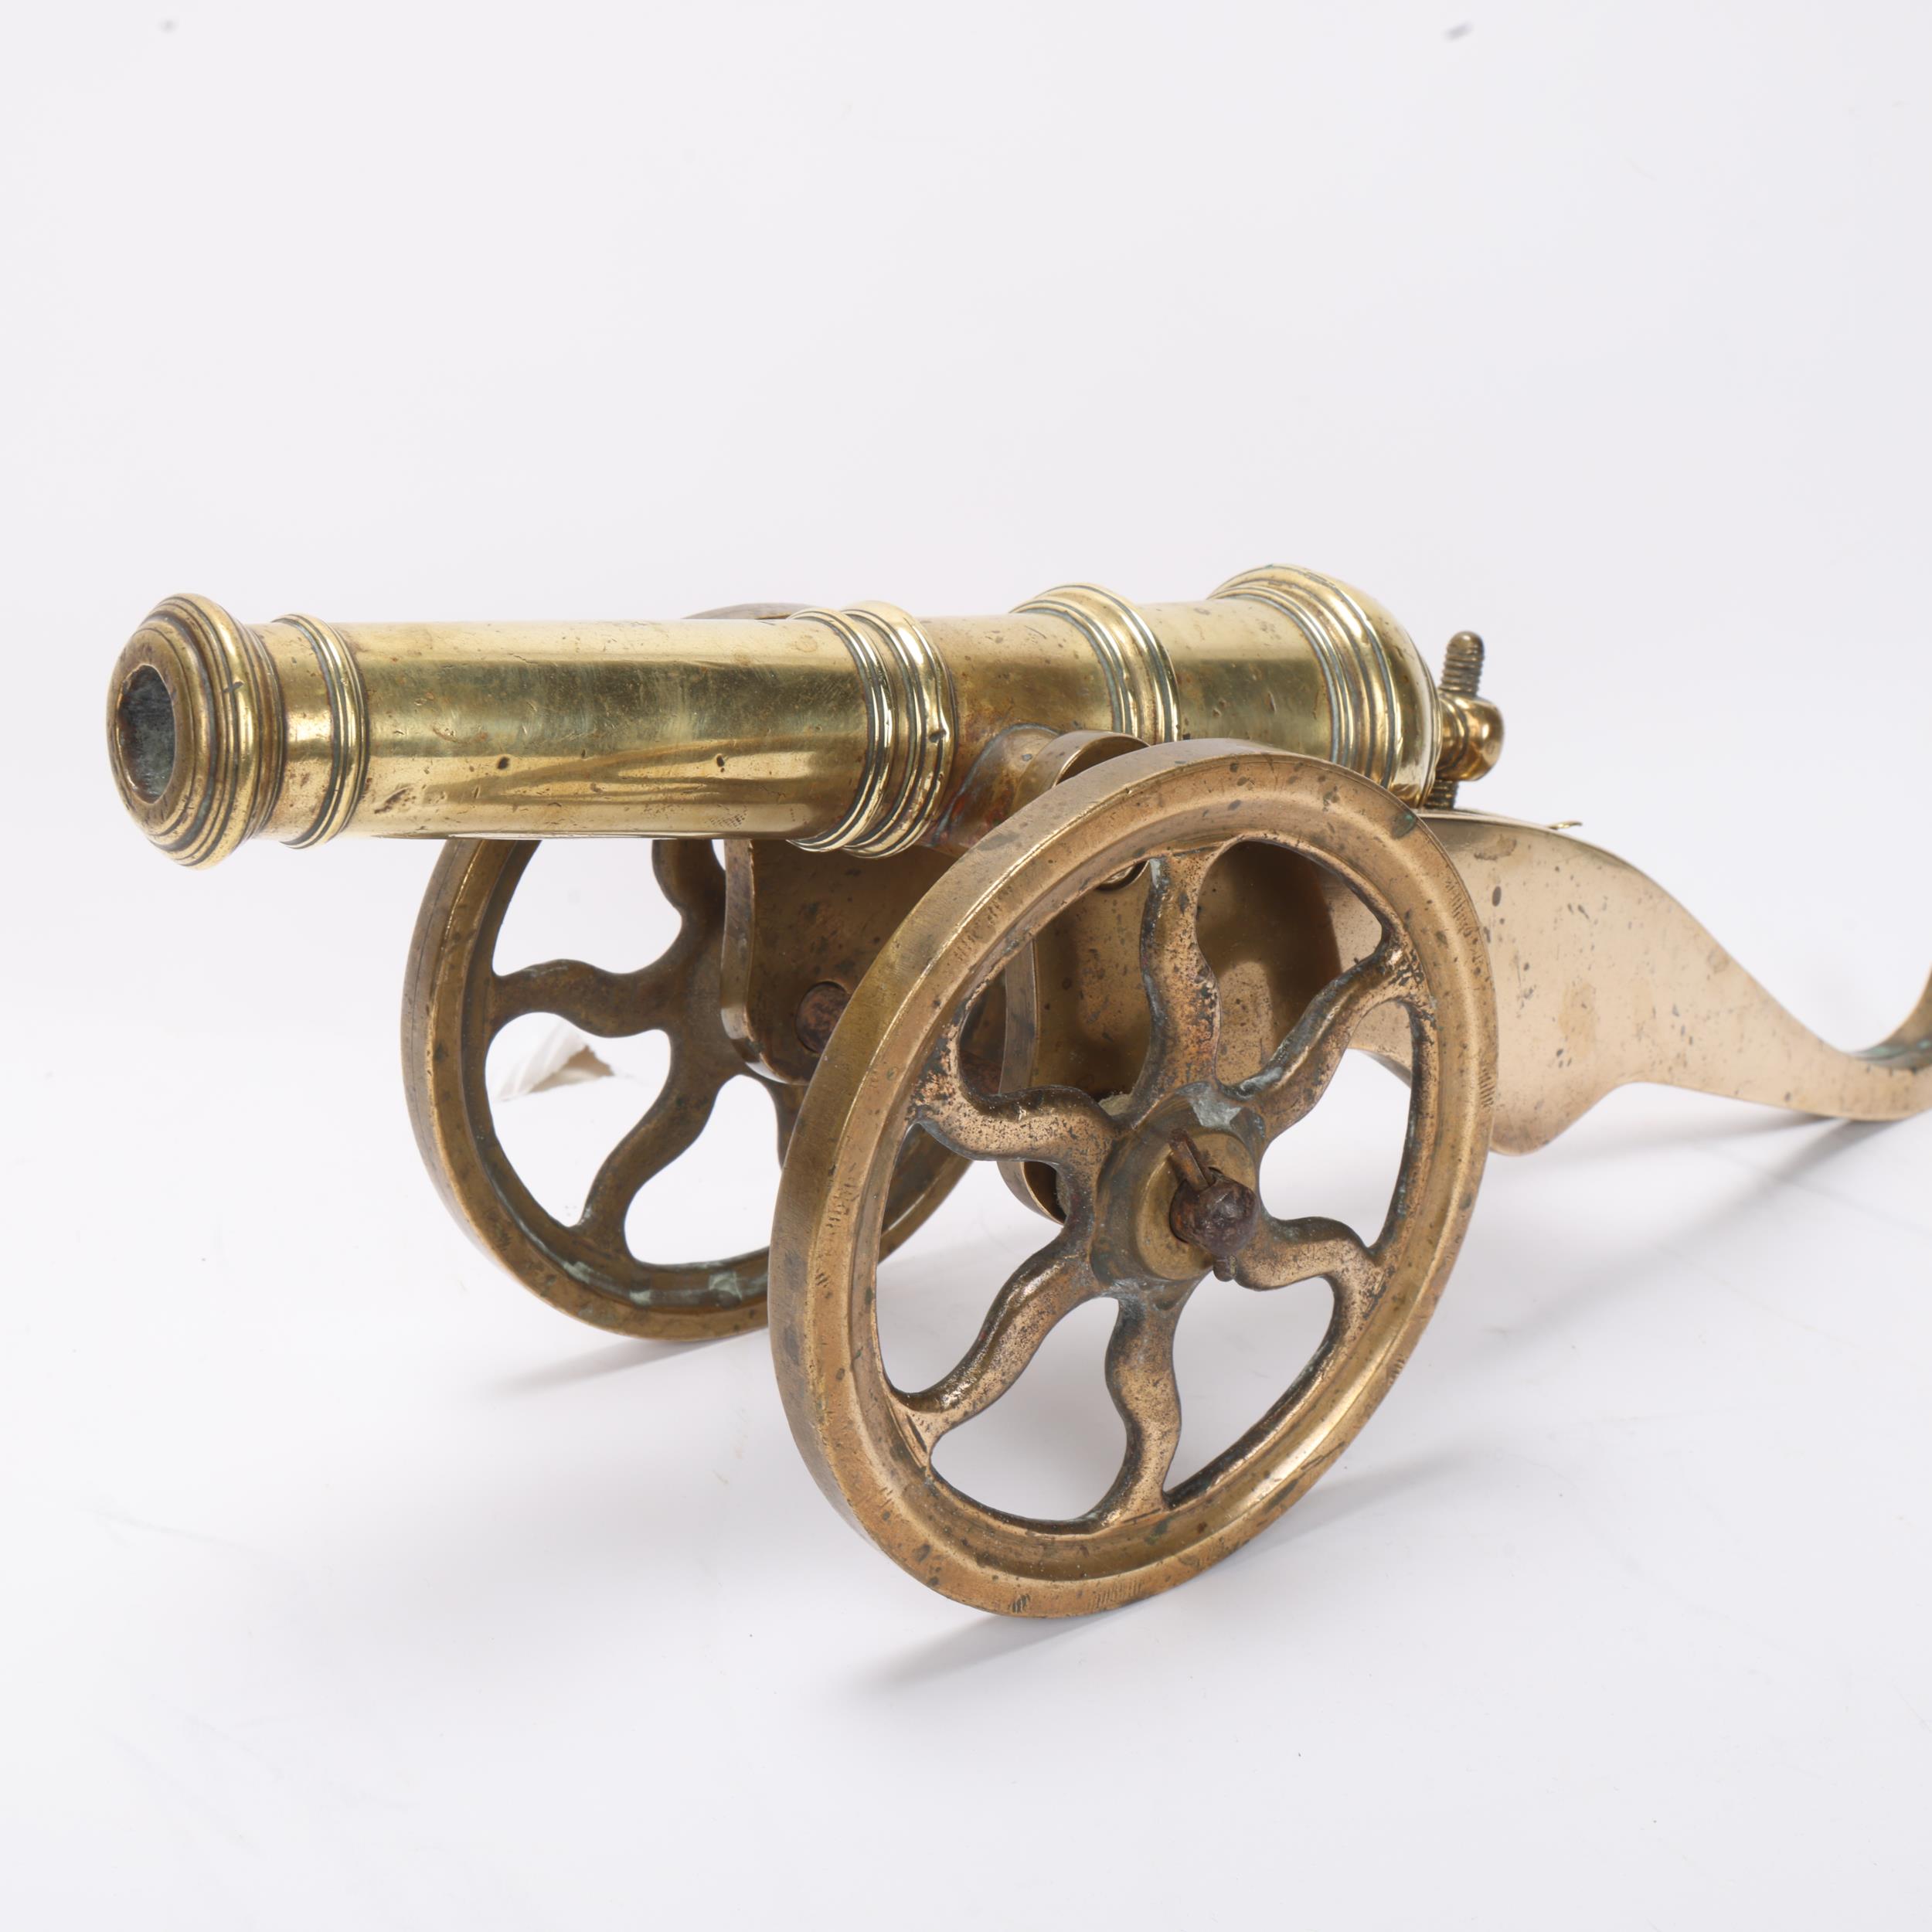 A good quality brass table cannon, 18th or 19th century with ringed barrel on wheeled carriage, - Image 2 of 3